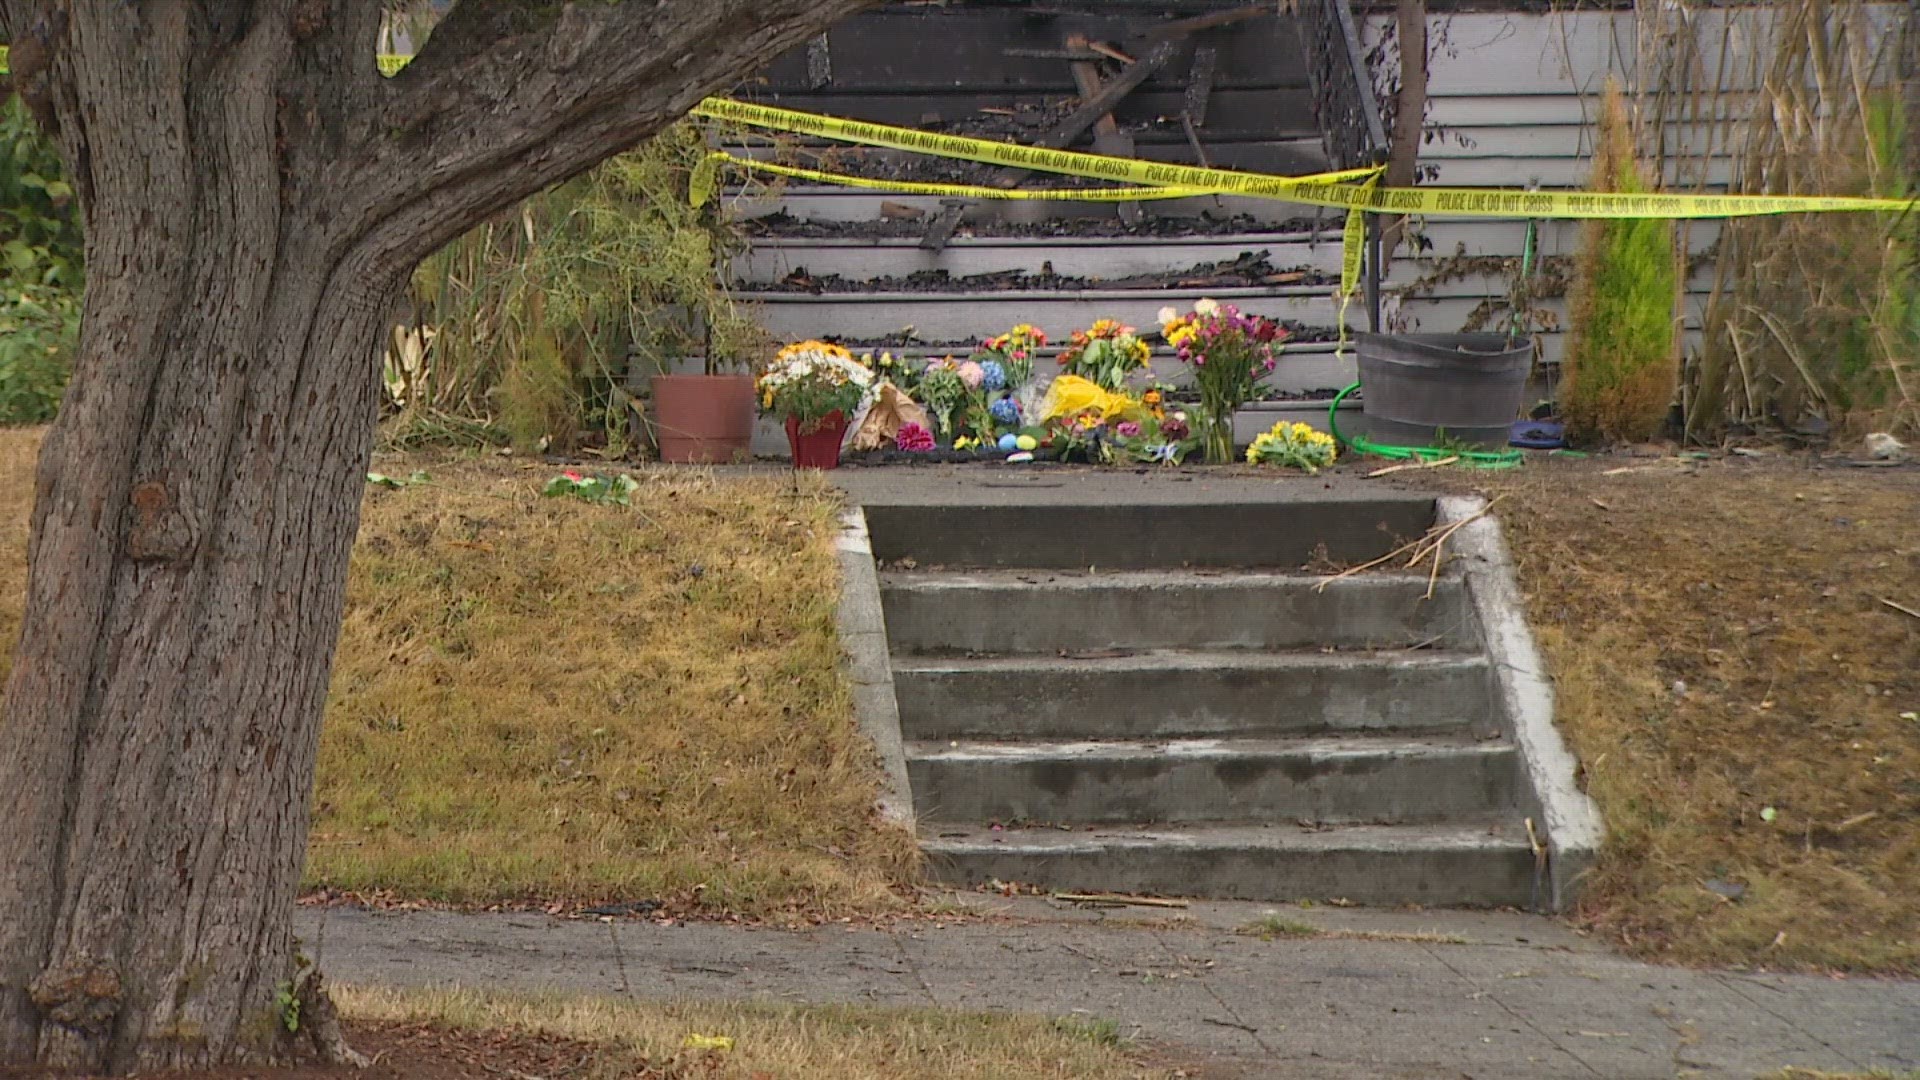 The King County Medical Examiner ruled the death of 48-year-old Salvatore Ragusa, the fourth person found dead in the fire, a suicide.